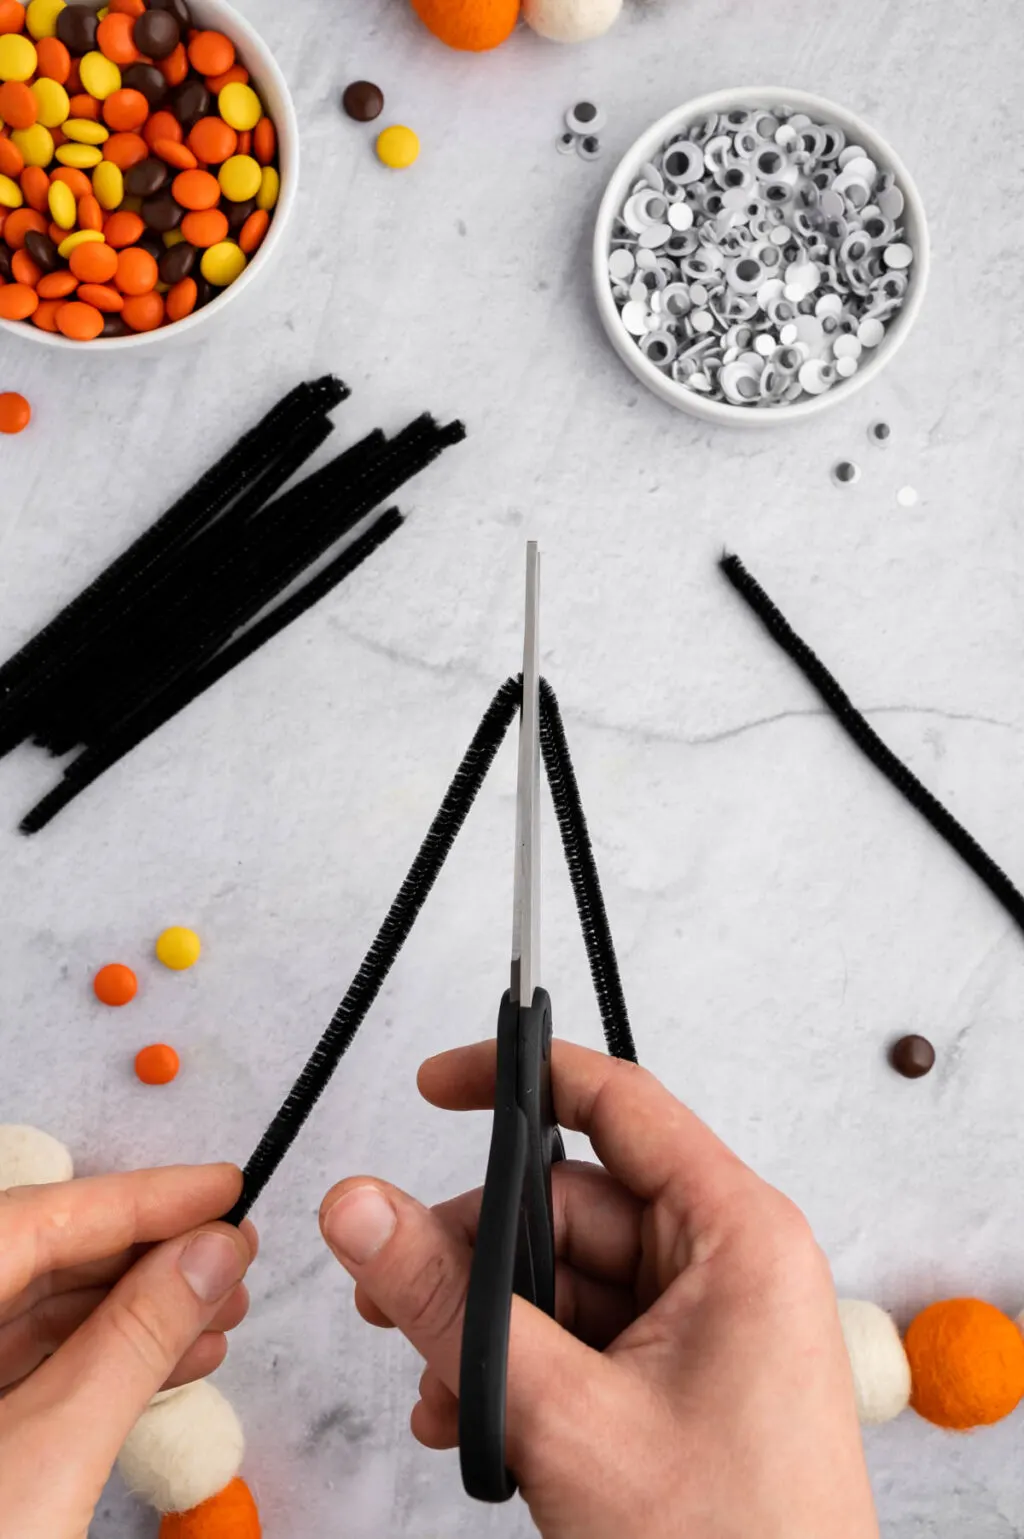 hands using scissors to cute black pipe cleaners in half